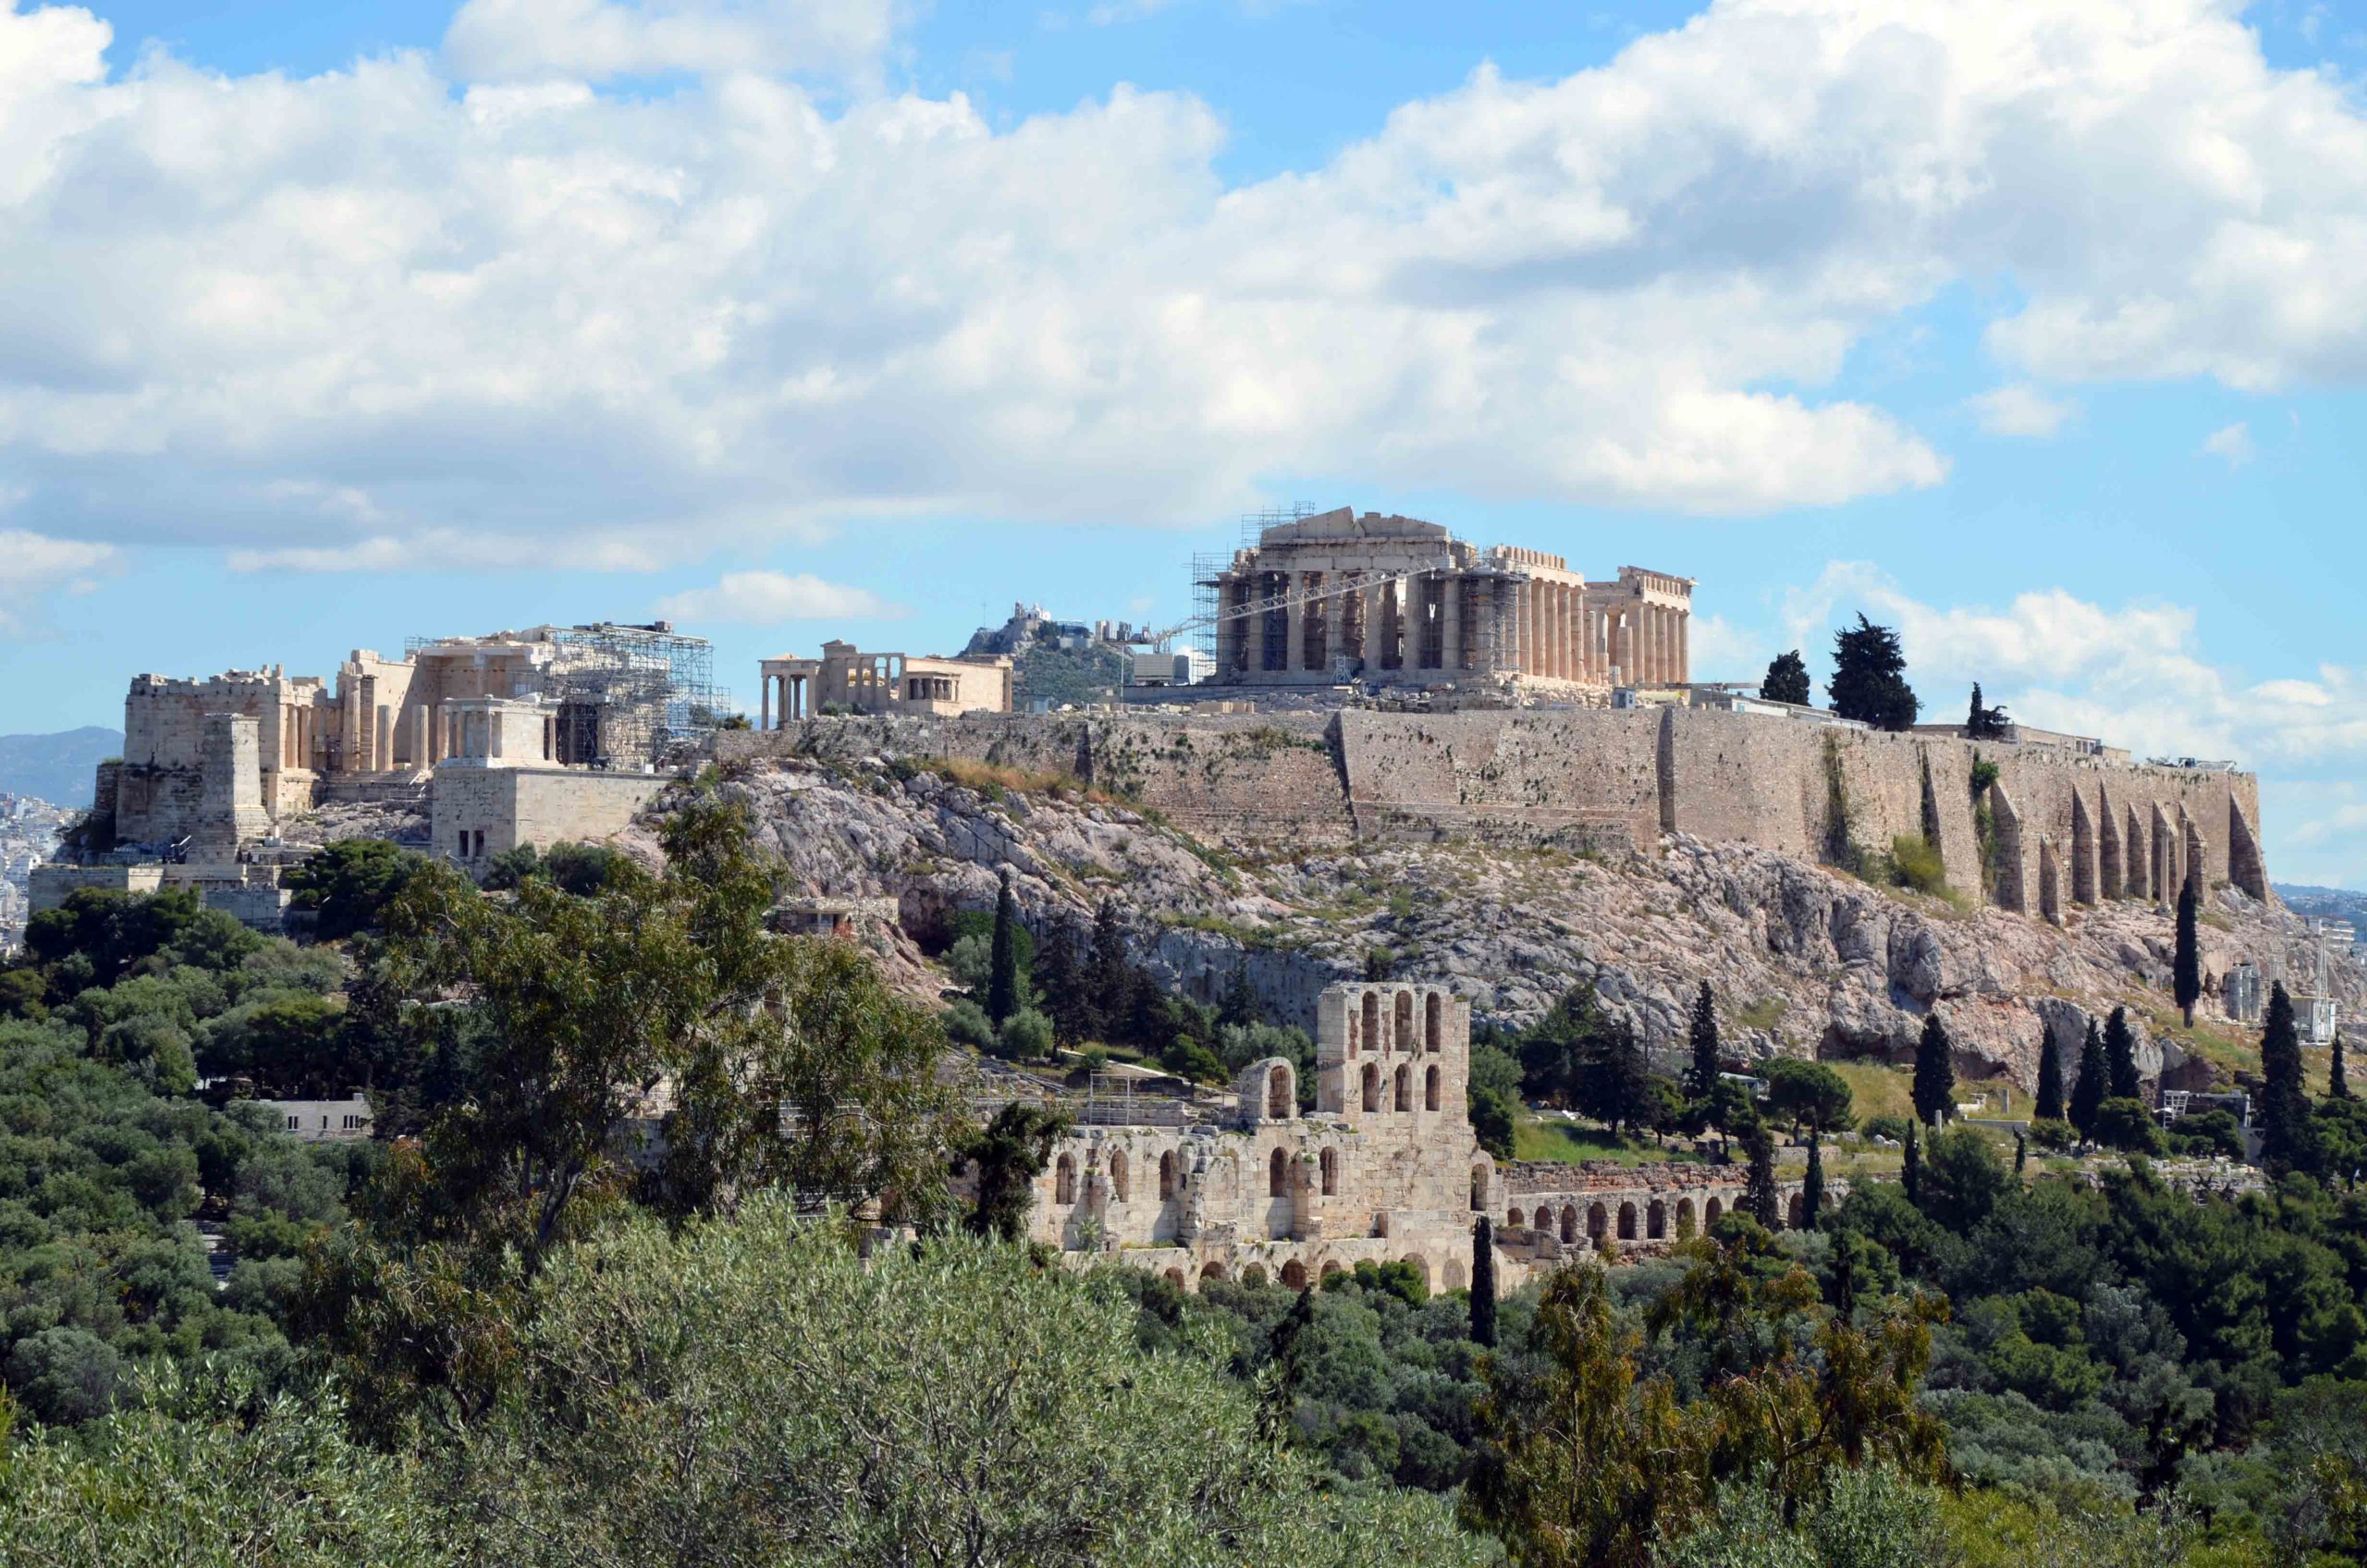 The Acropolis of Athens viewed from the Hill of the Muses (photo: Carole Raddato, CC BY-SA 2.0)